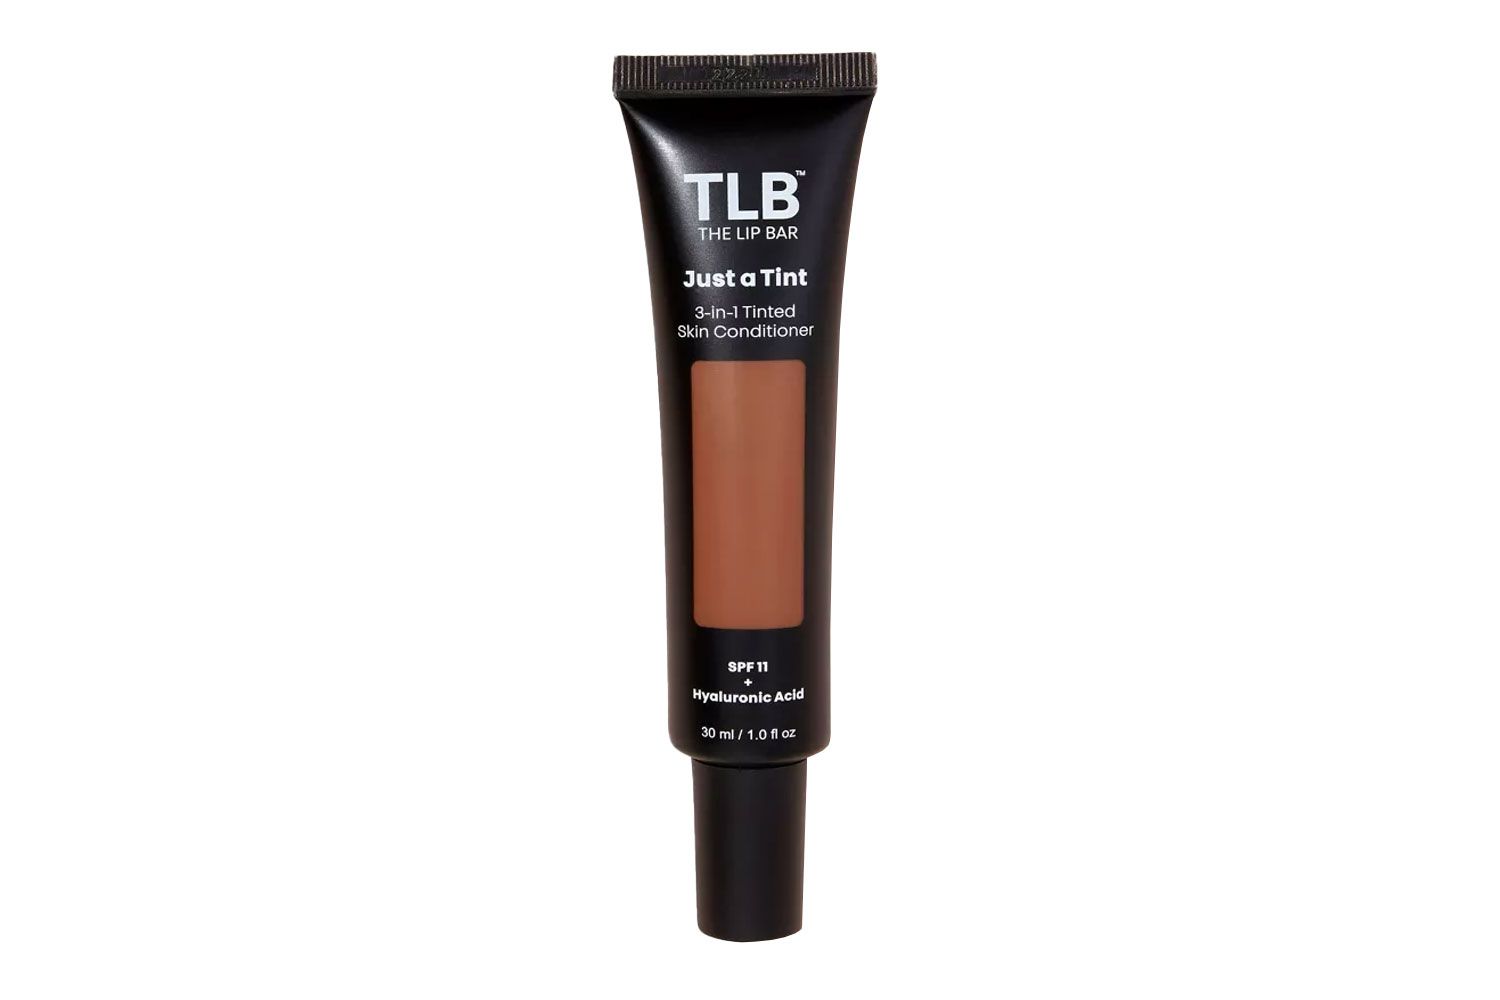 The Lip Bar Just A Tint 3-in-1 Skin Conditioner